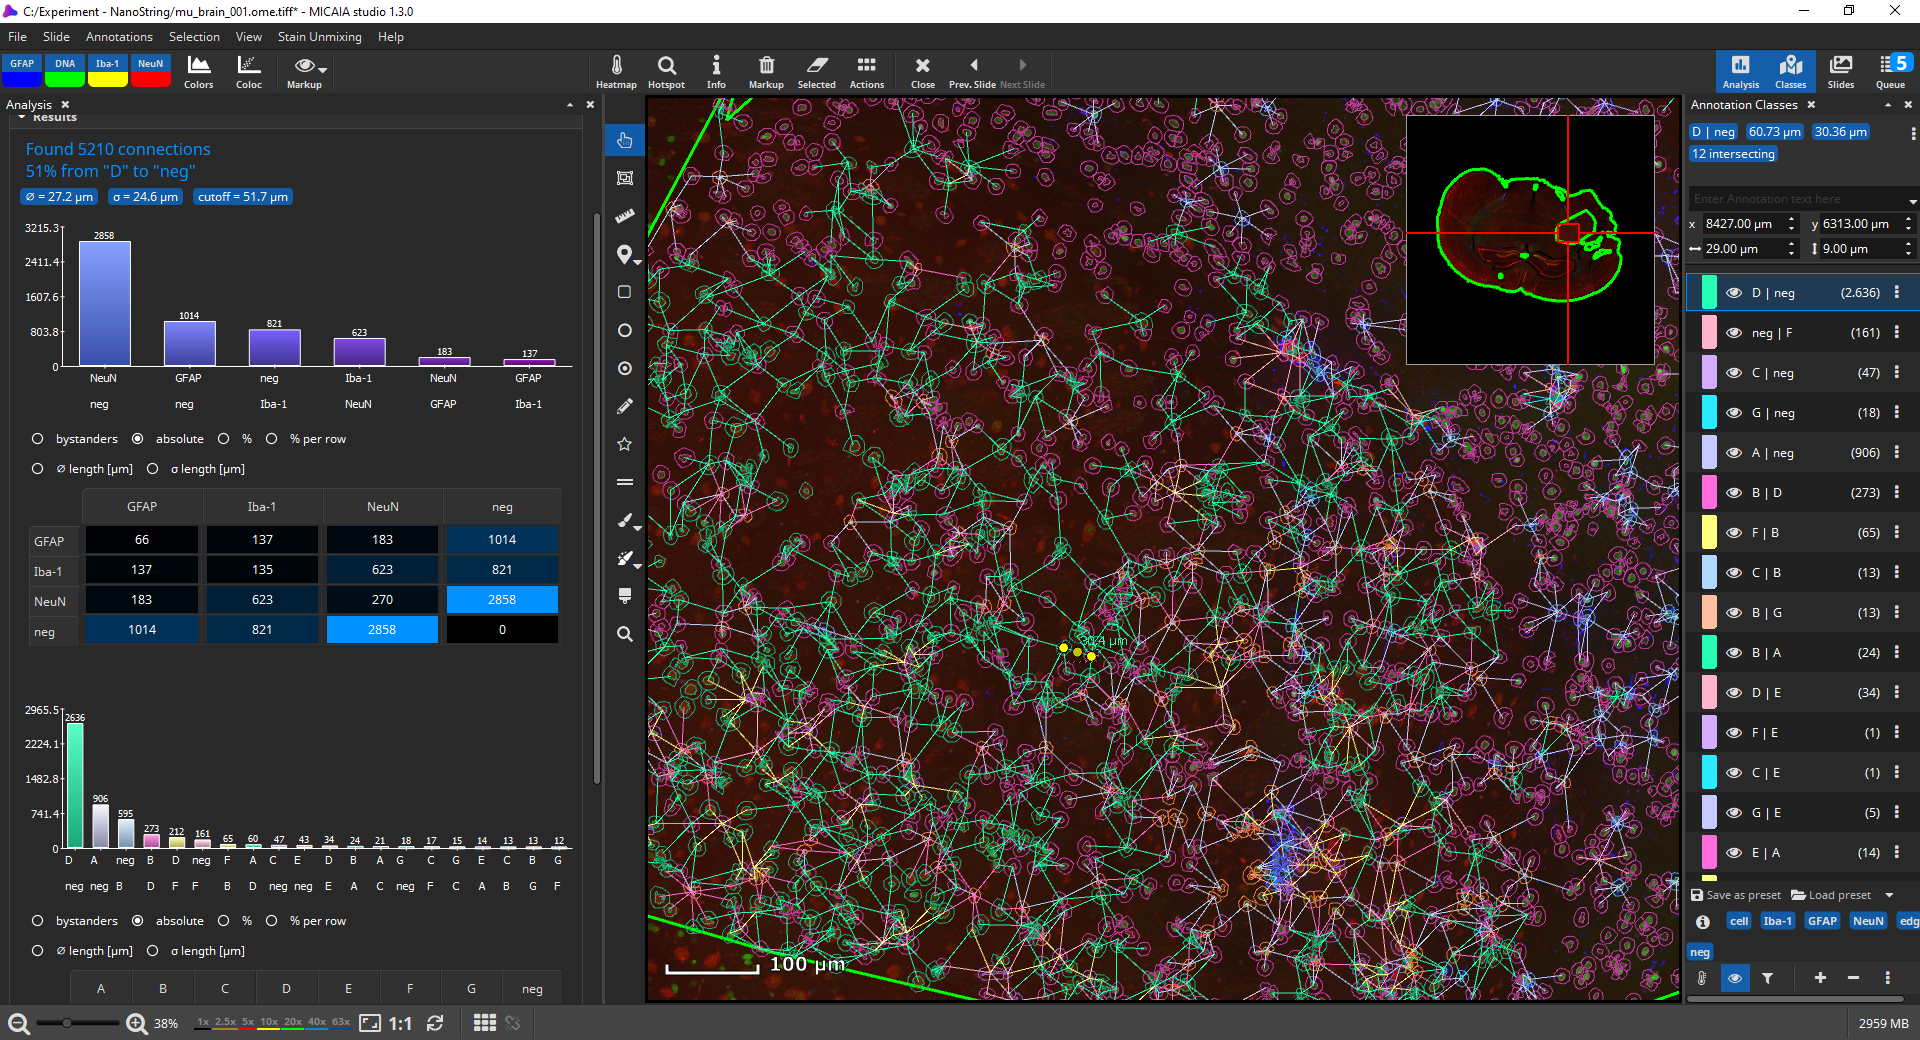 FL Colocalization App analysis result: cell-cell interactions